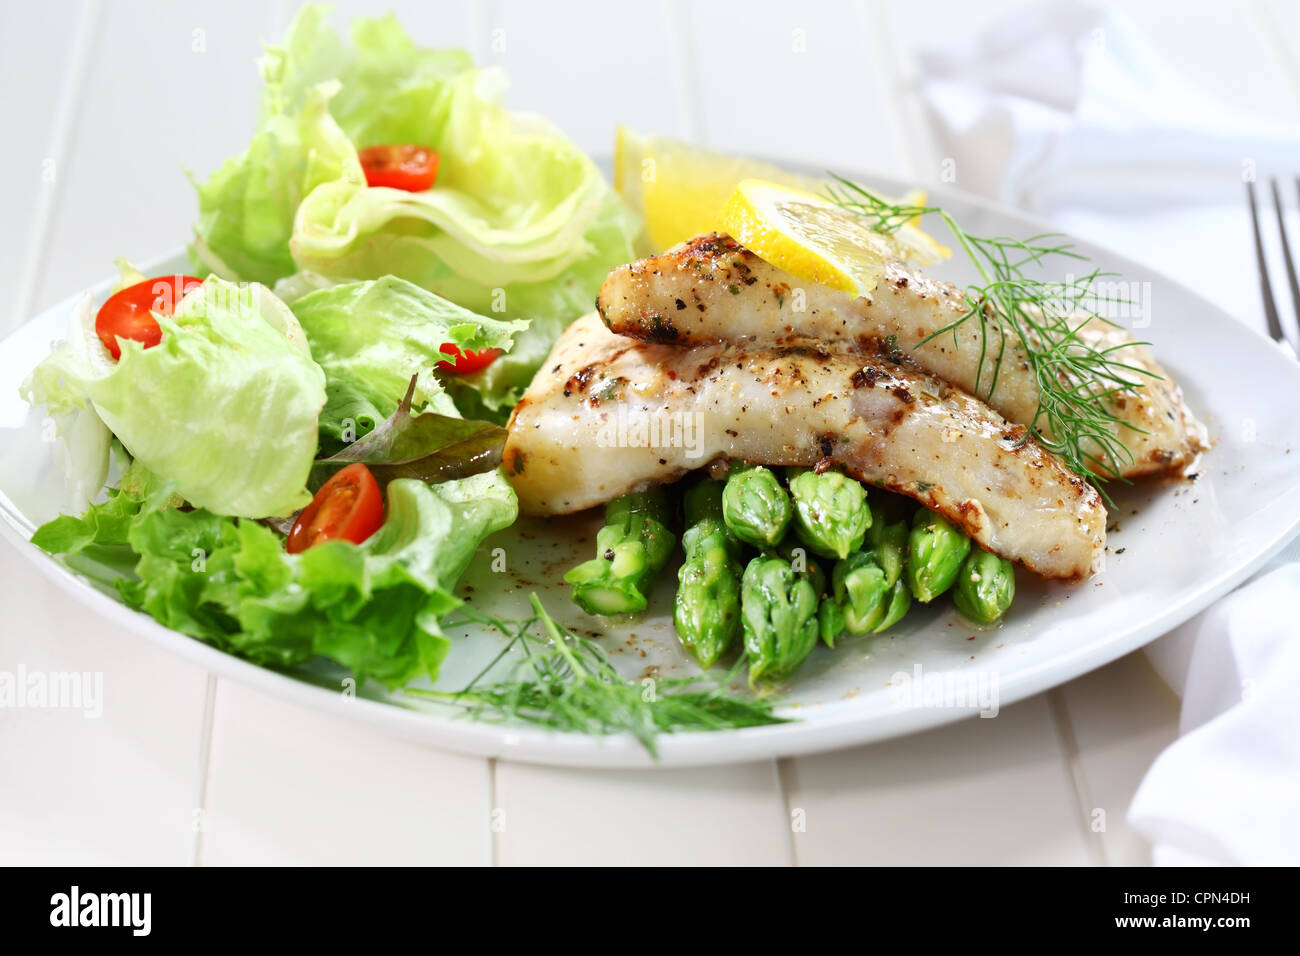 Delicious fried fish on green asparagus with salad Stock Photo